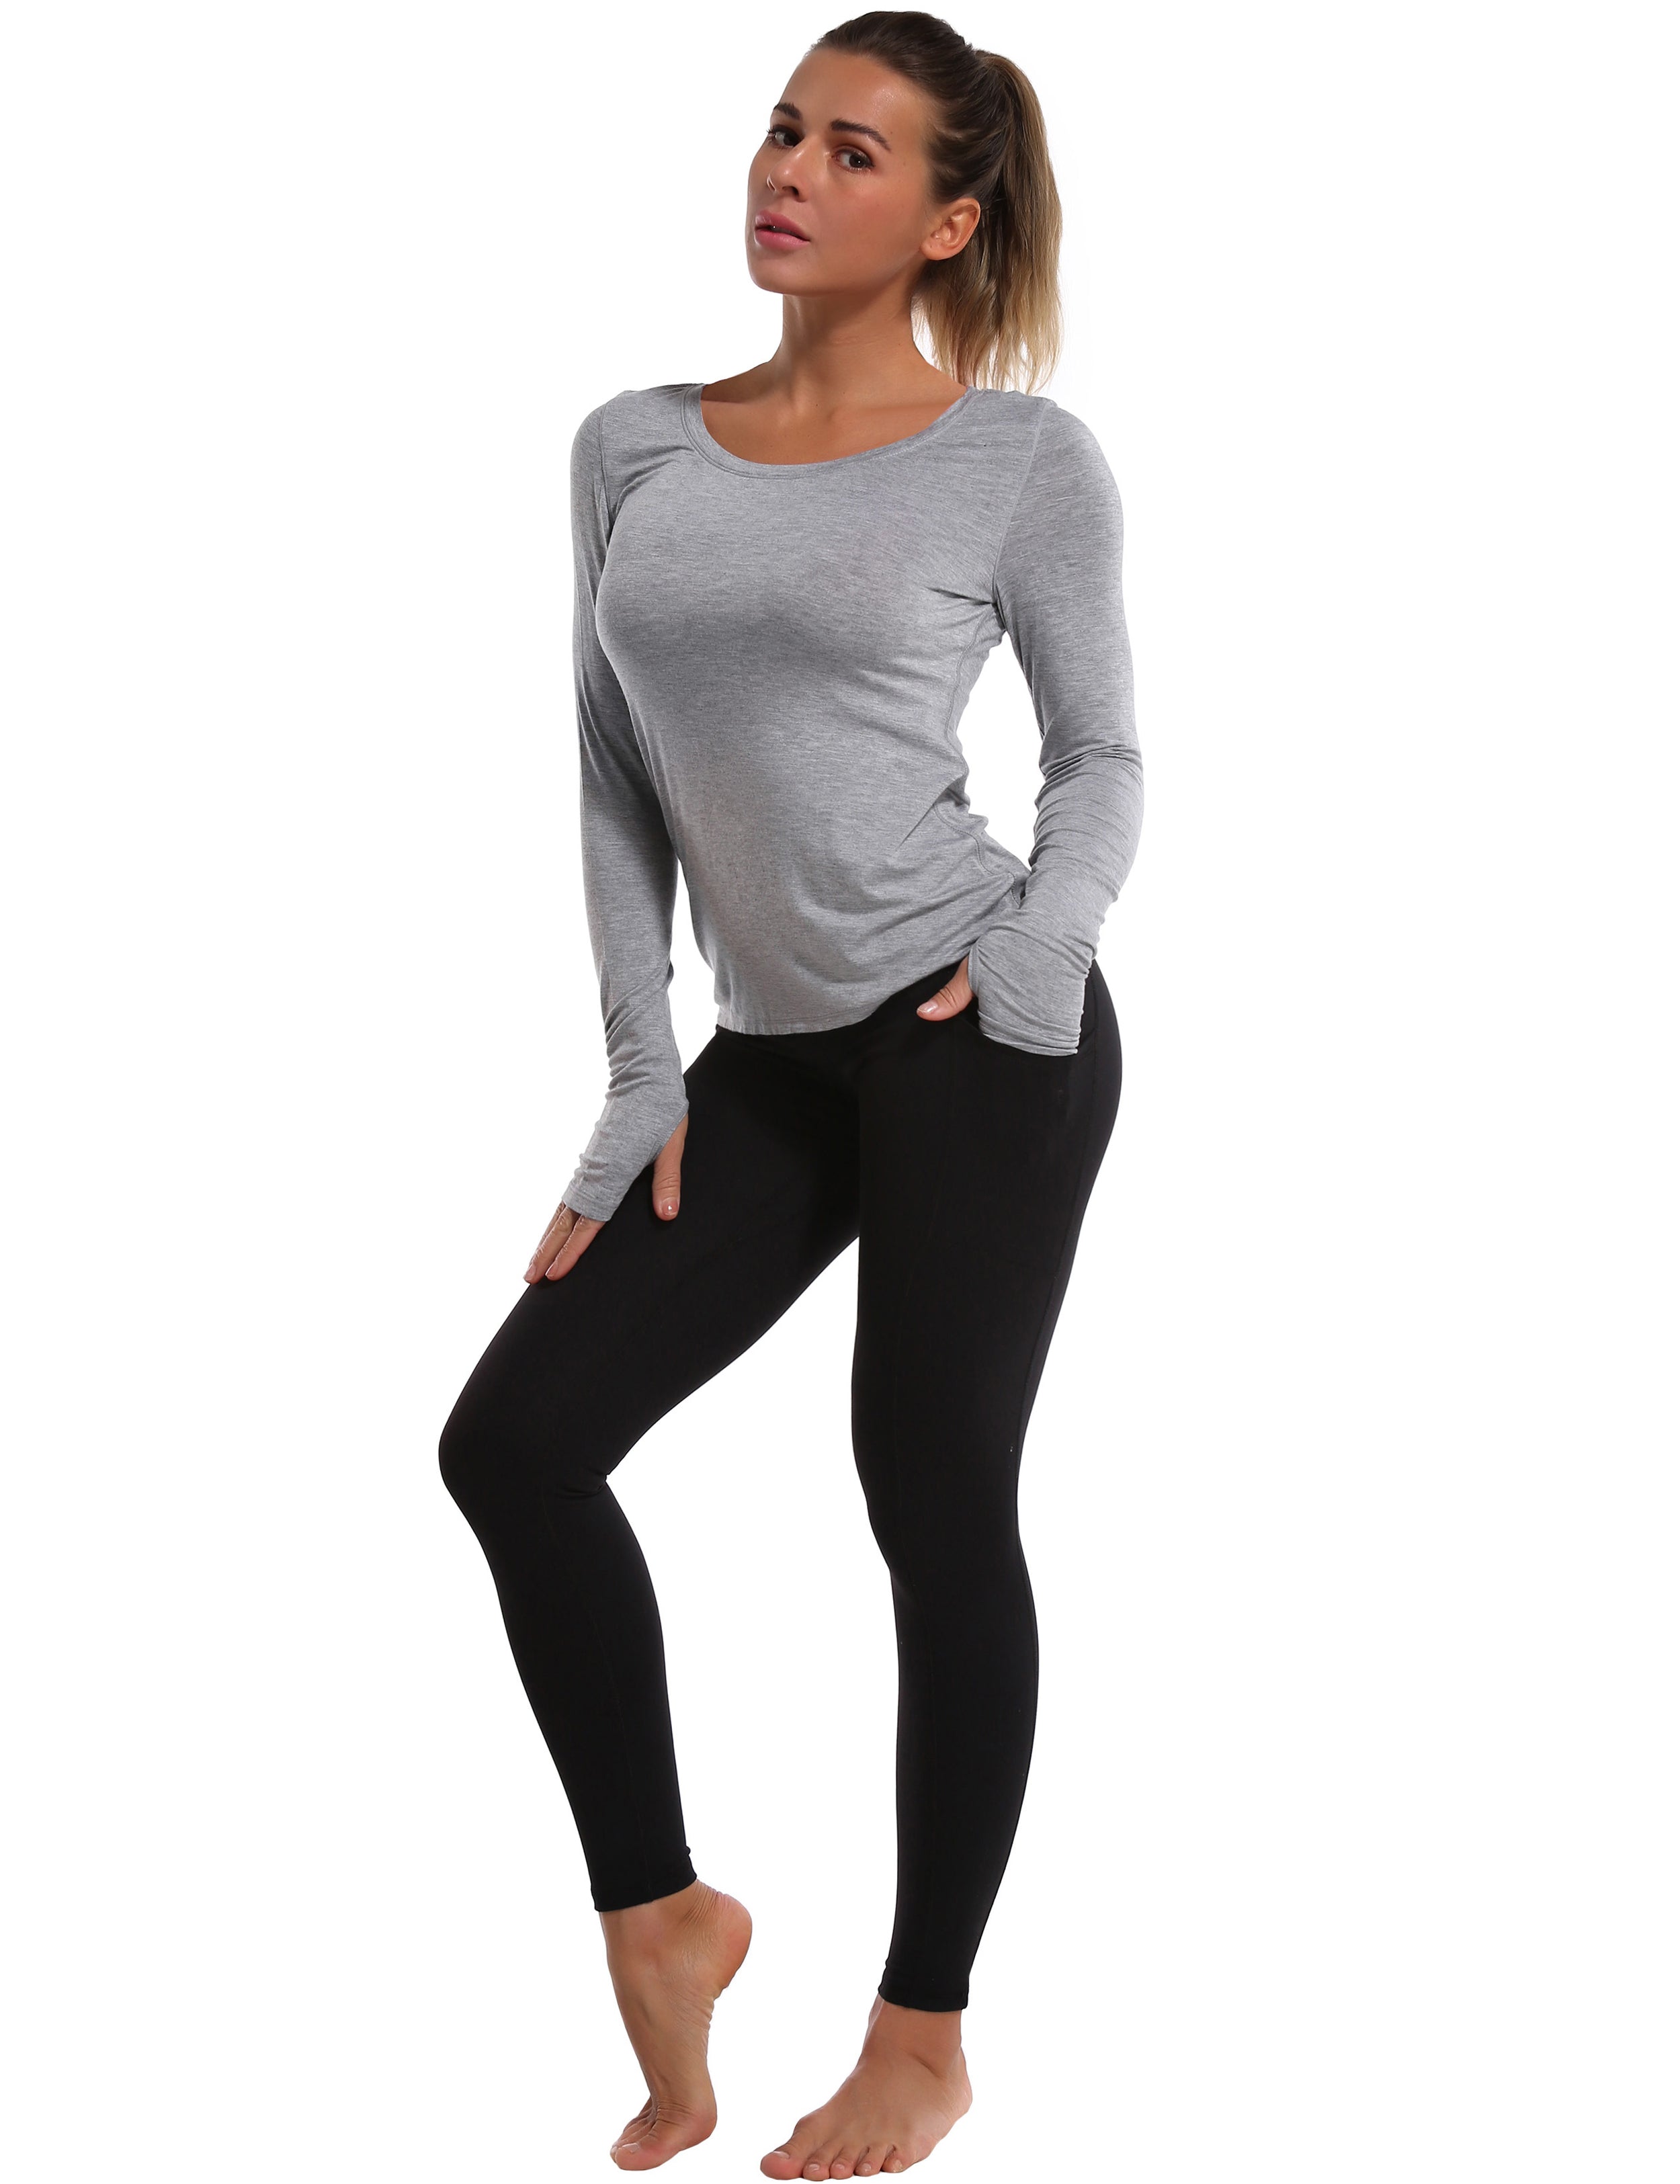 Athlete Long Sleeve Tops heathergray Designed for On the Move Slim fit 93%Modal/7%Spandex Four-way stretch Naturally breathable Super-Soft, Modal Fabric